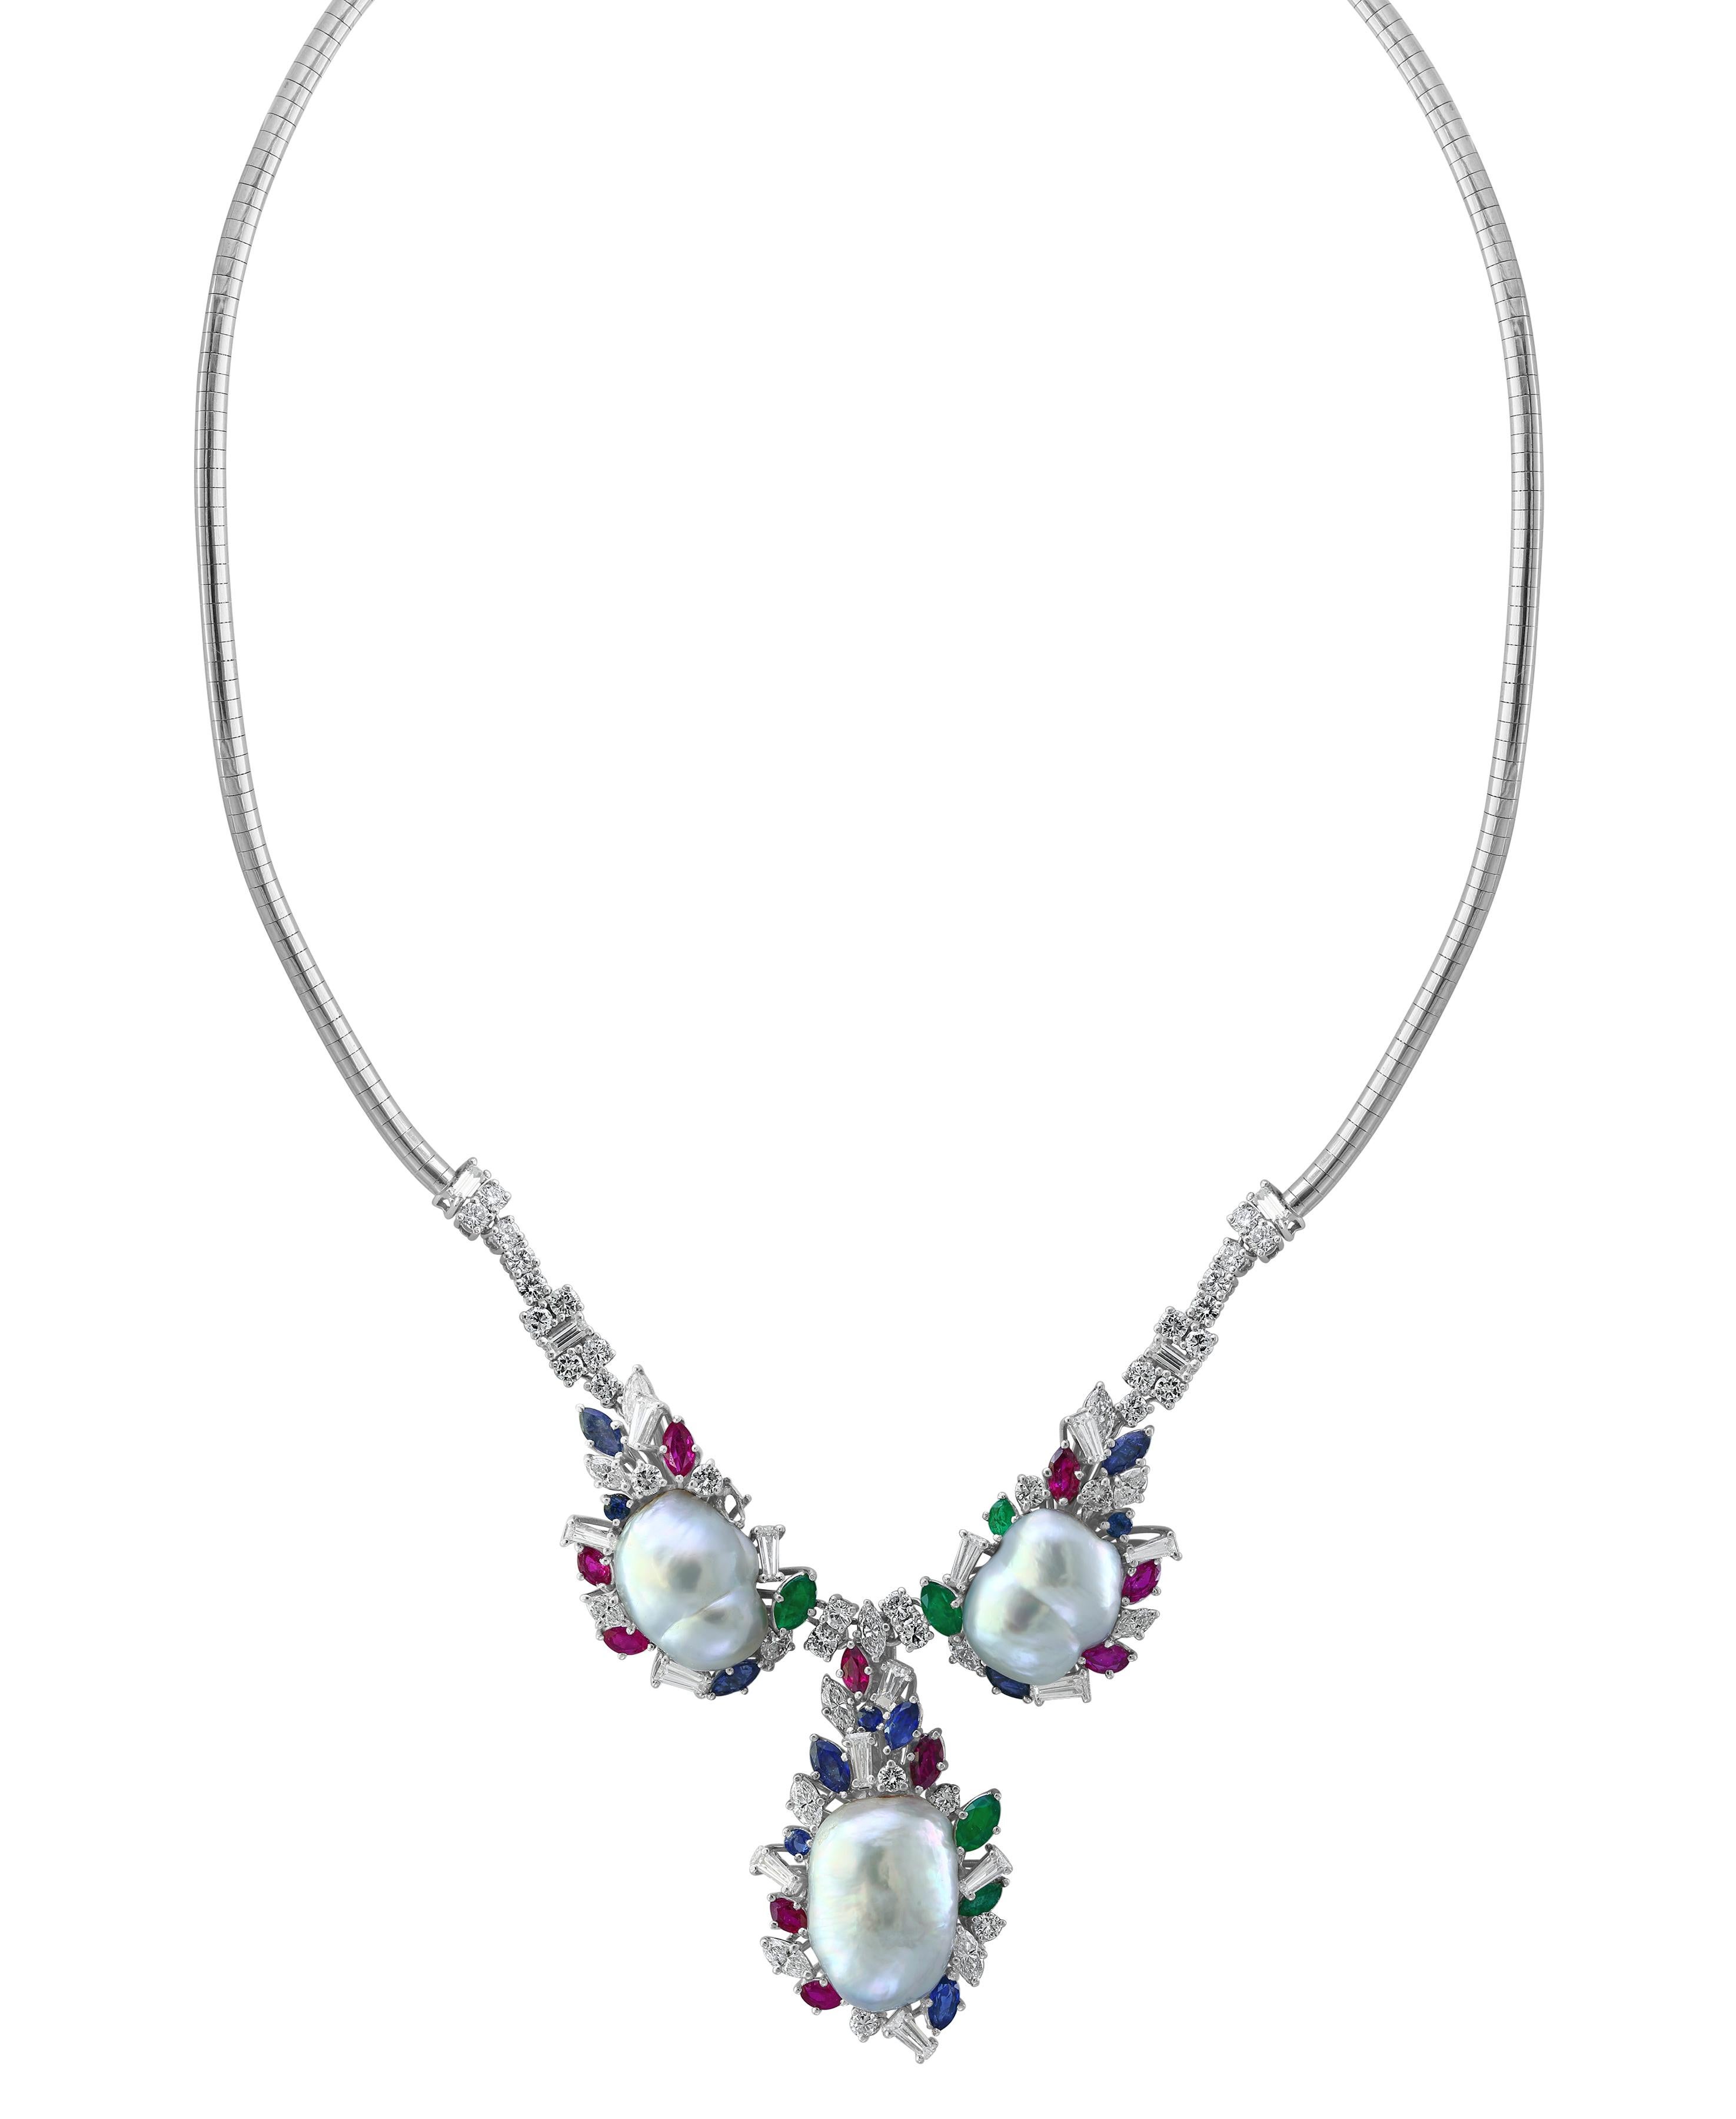 Emerald Ruby Sapphire Diamond Pearl  Necklace  Set In 18 K Gold
Beautiful Necklace
This Necklace has all precious stones 
All are Big size  and best quality.
Total color stone weight is approximately  5.0 ct
Diamonds  approximately 6.5 ct
the center